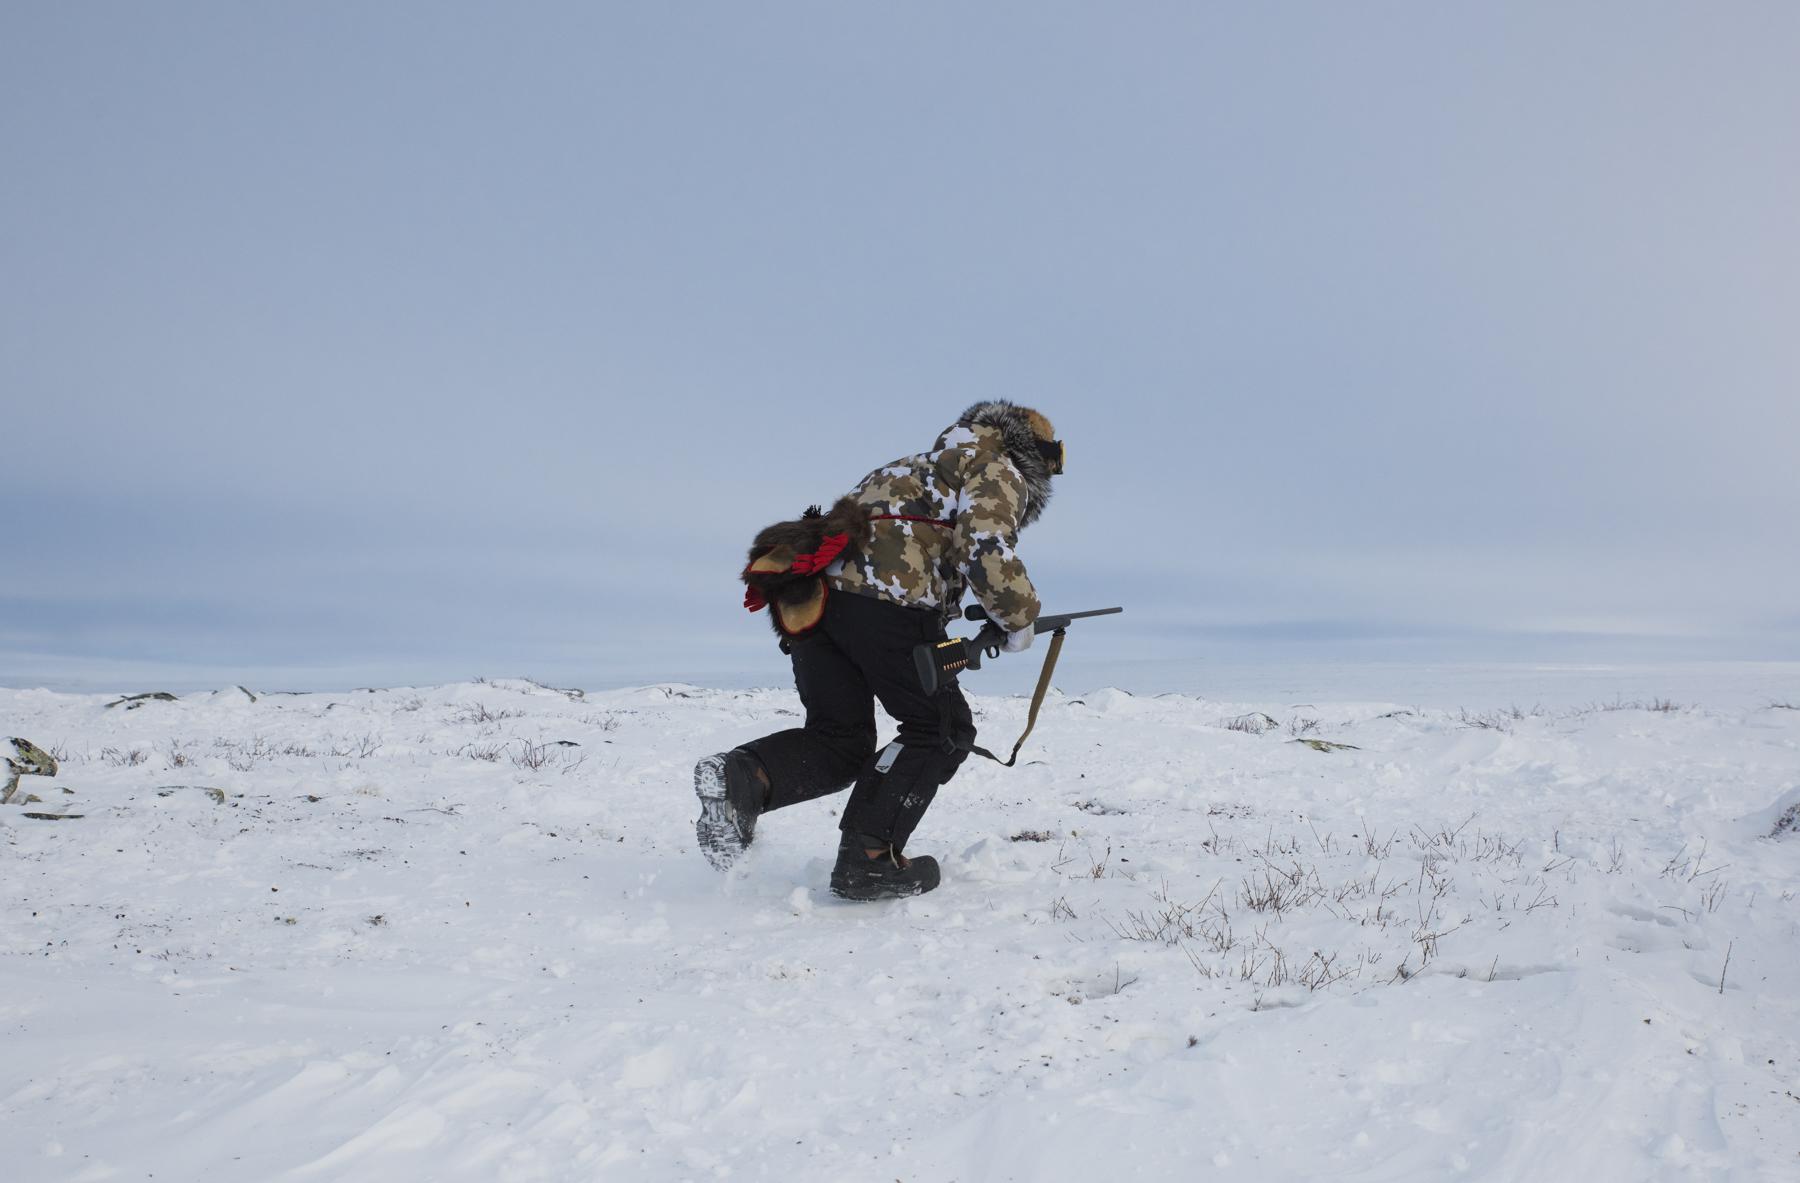 The Hunt for Healthy Food - Randy Baillargeon moves over an outcrop during a hunt...